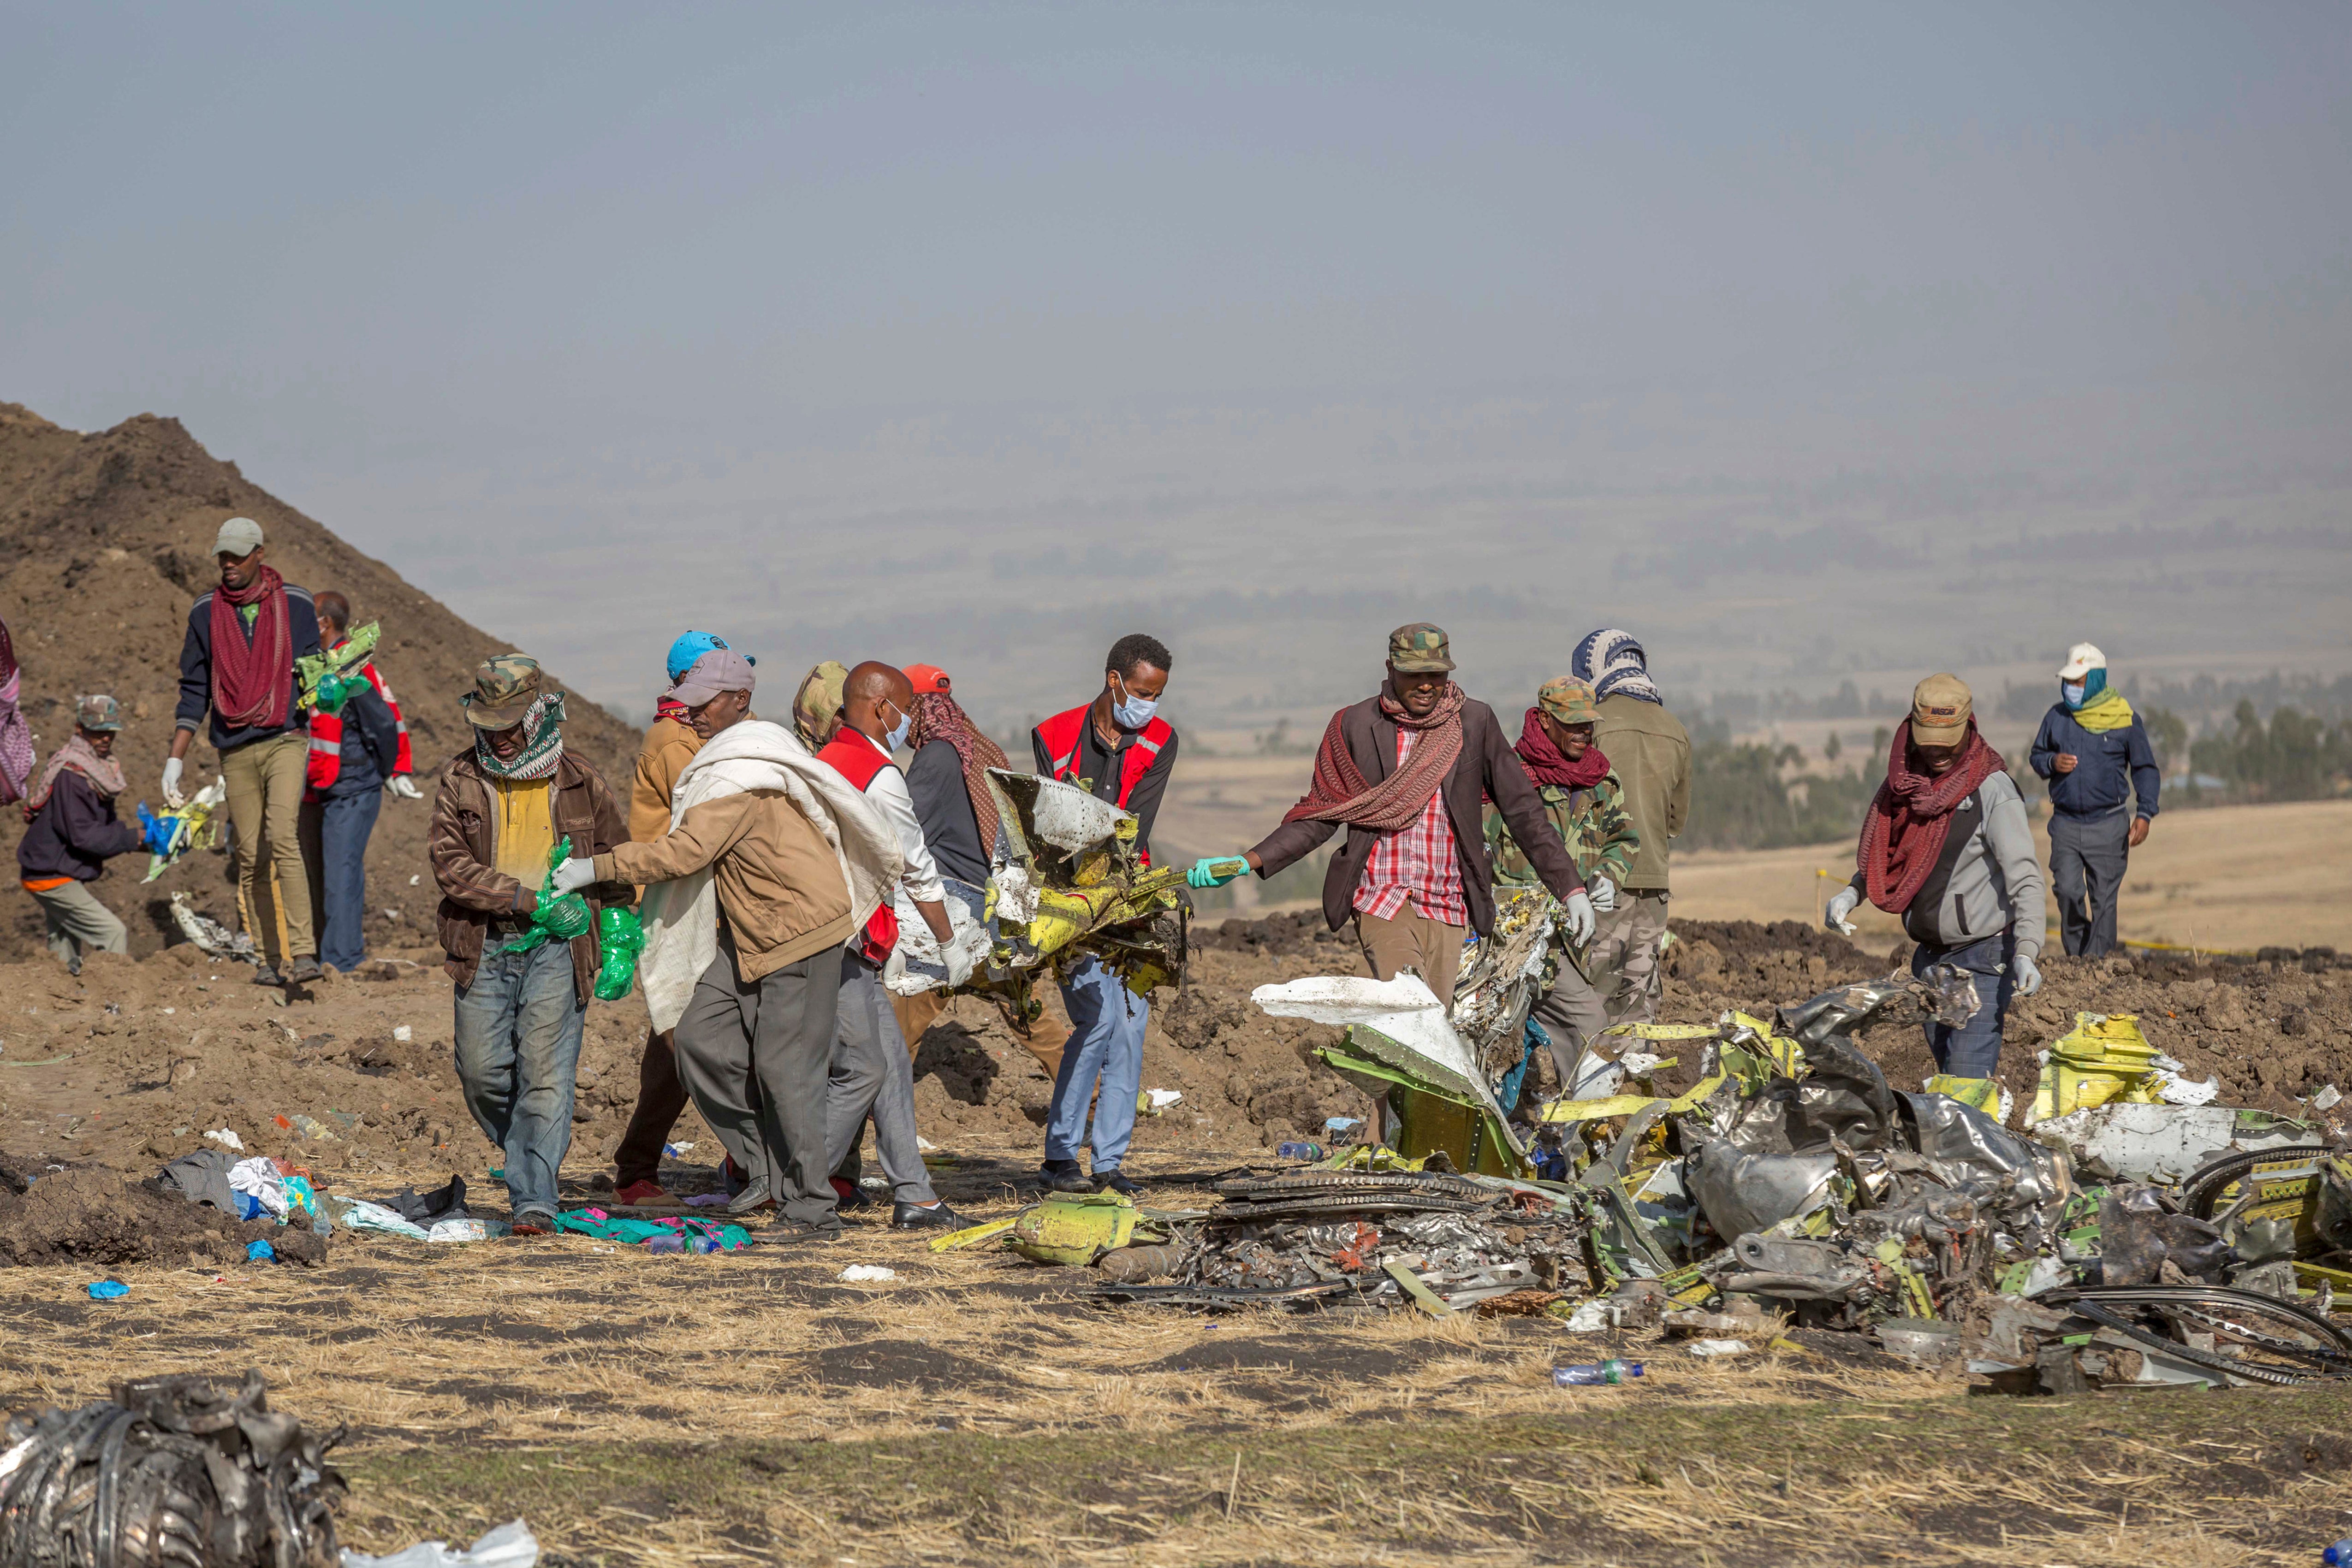 Rescuers work at the scene of an Ethiopian Airlines flight of a Boeing 737 Max 8 plane crash near Bishoftu, Ethiopia in March 2019